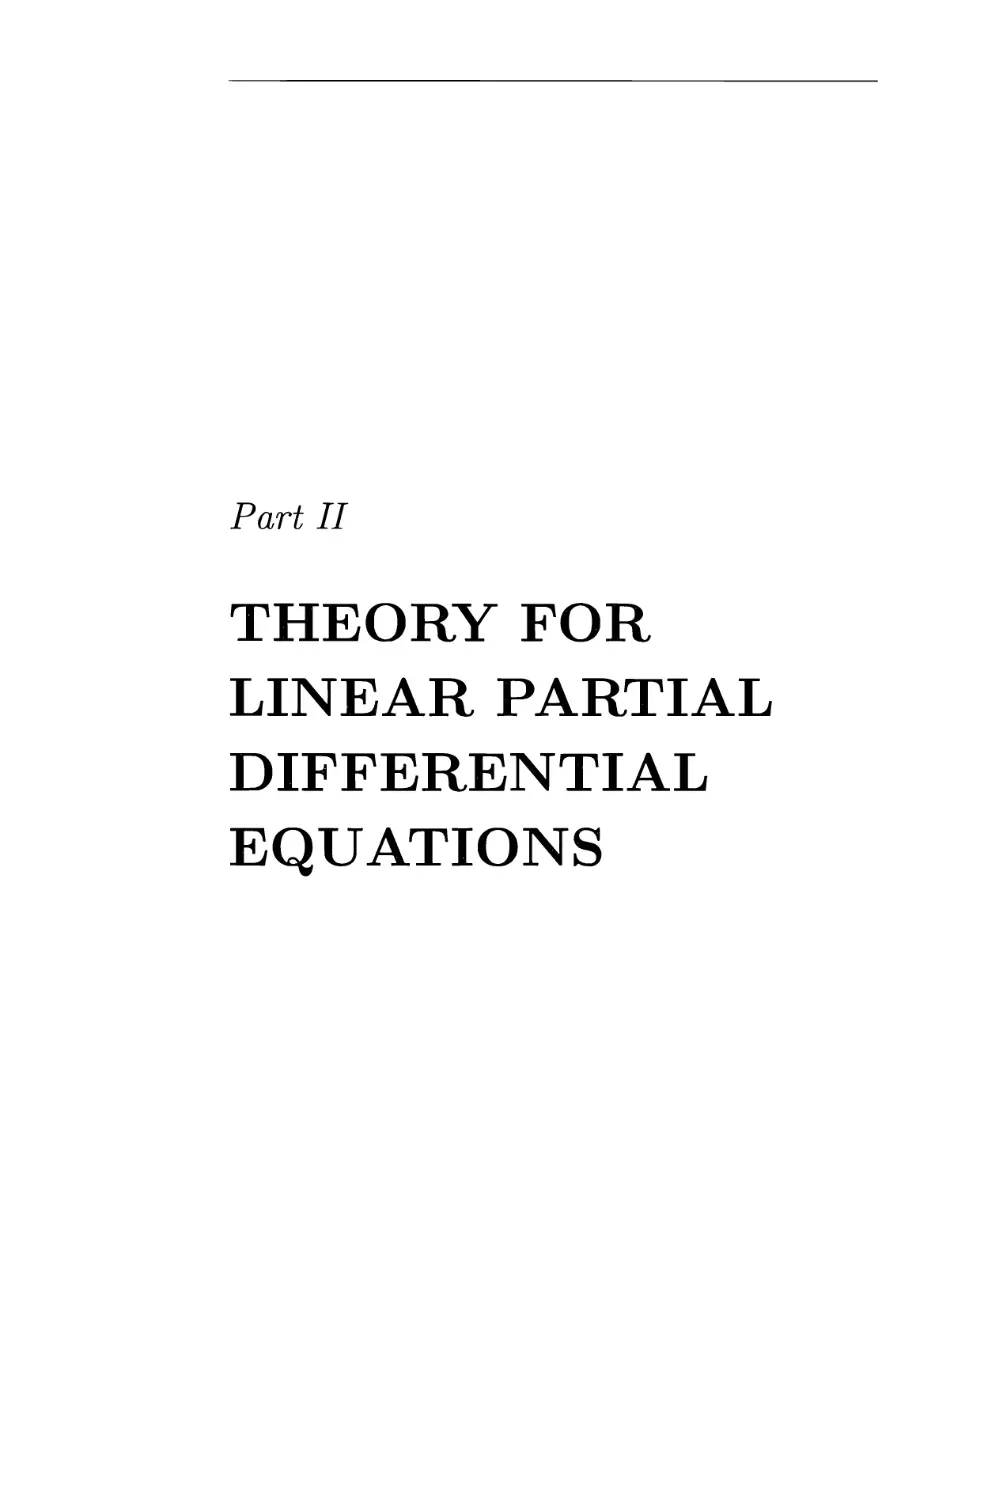 PART II: THEORY FOR LINEAR PARTIAL DIFFERENTIAL EQUATIONS